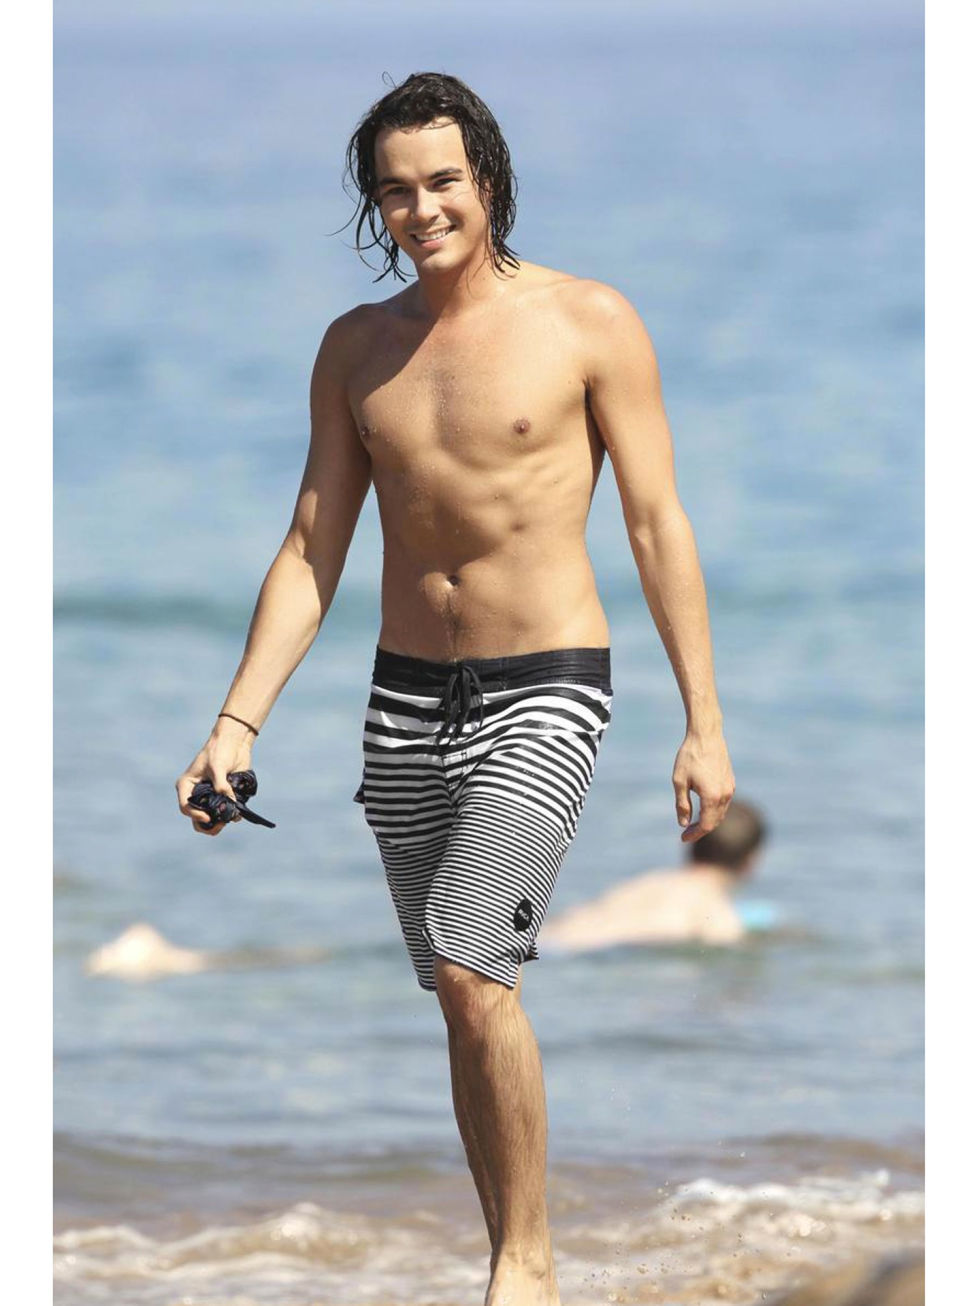 Tyler Blackburn Is The Hottest Young Heartthrob